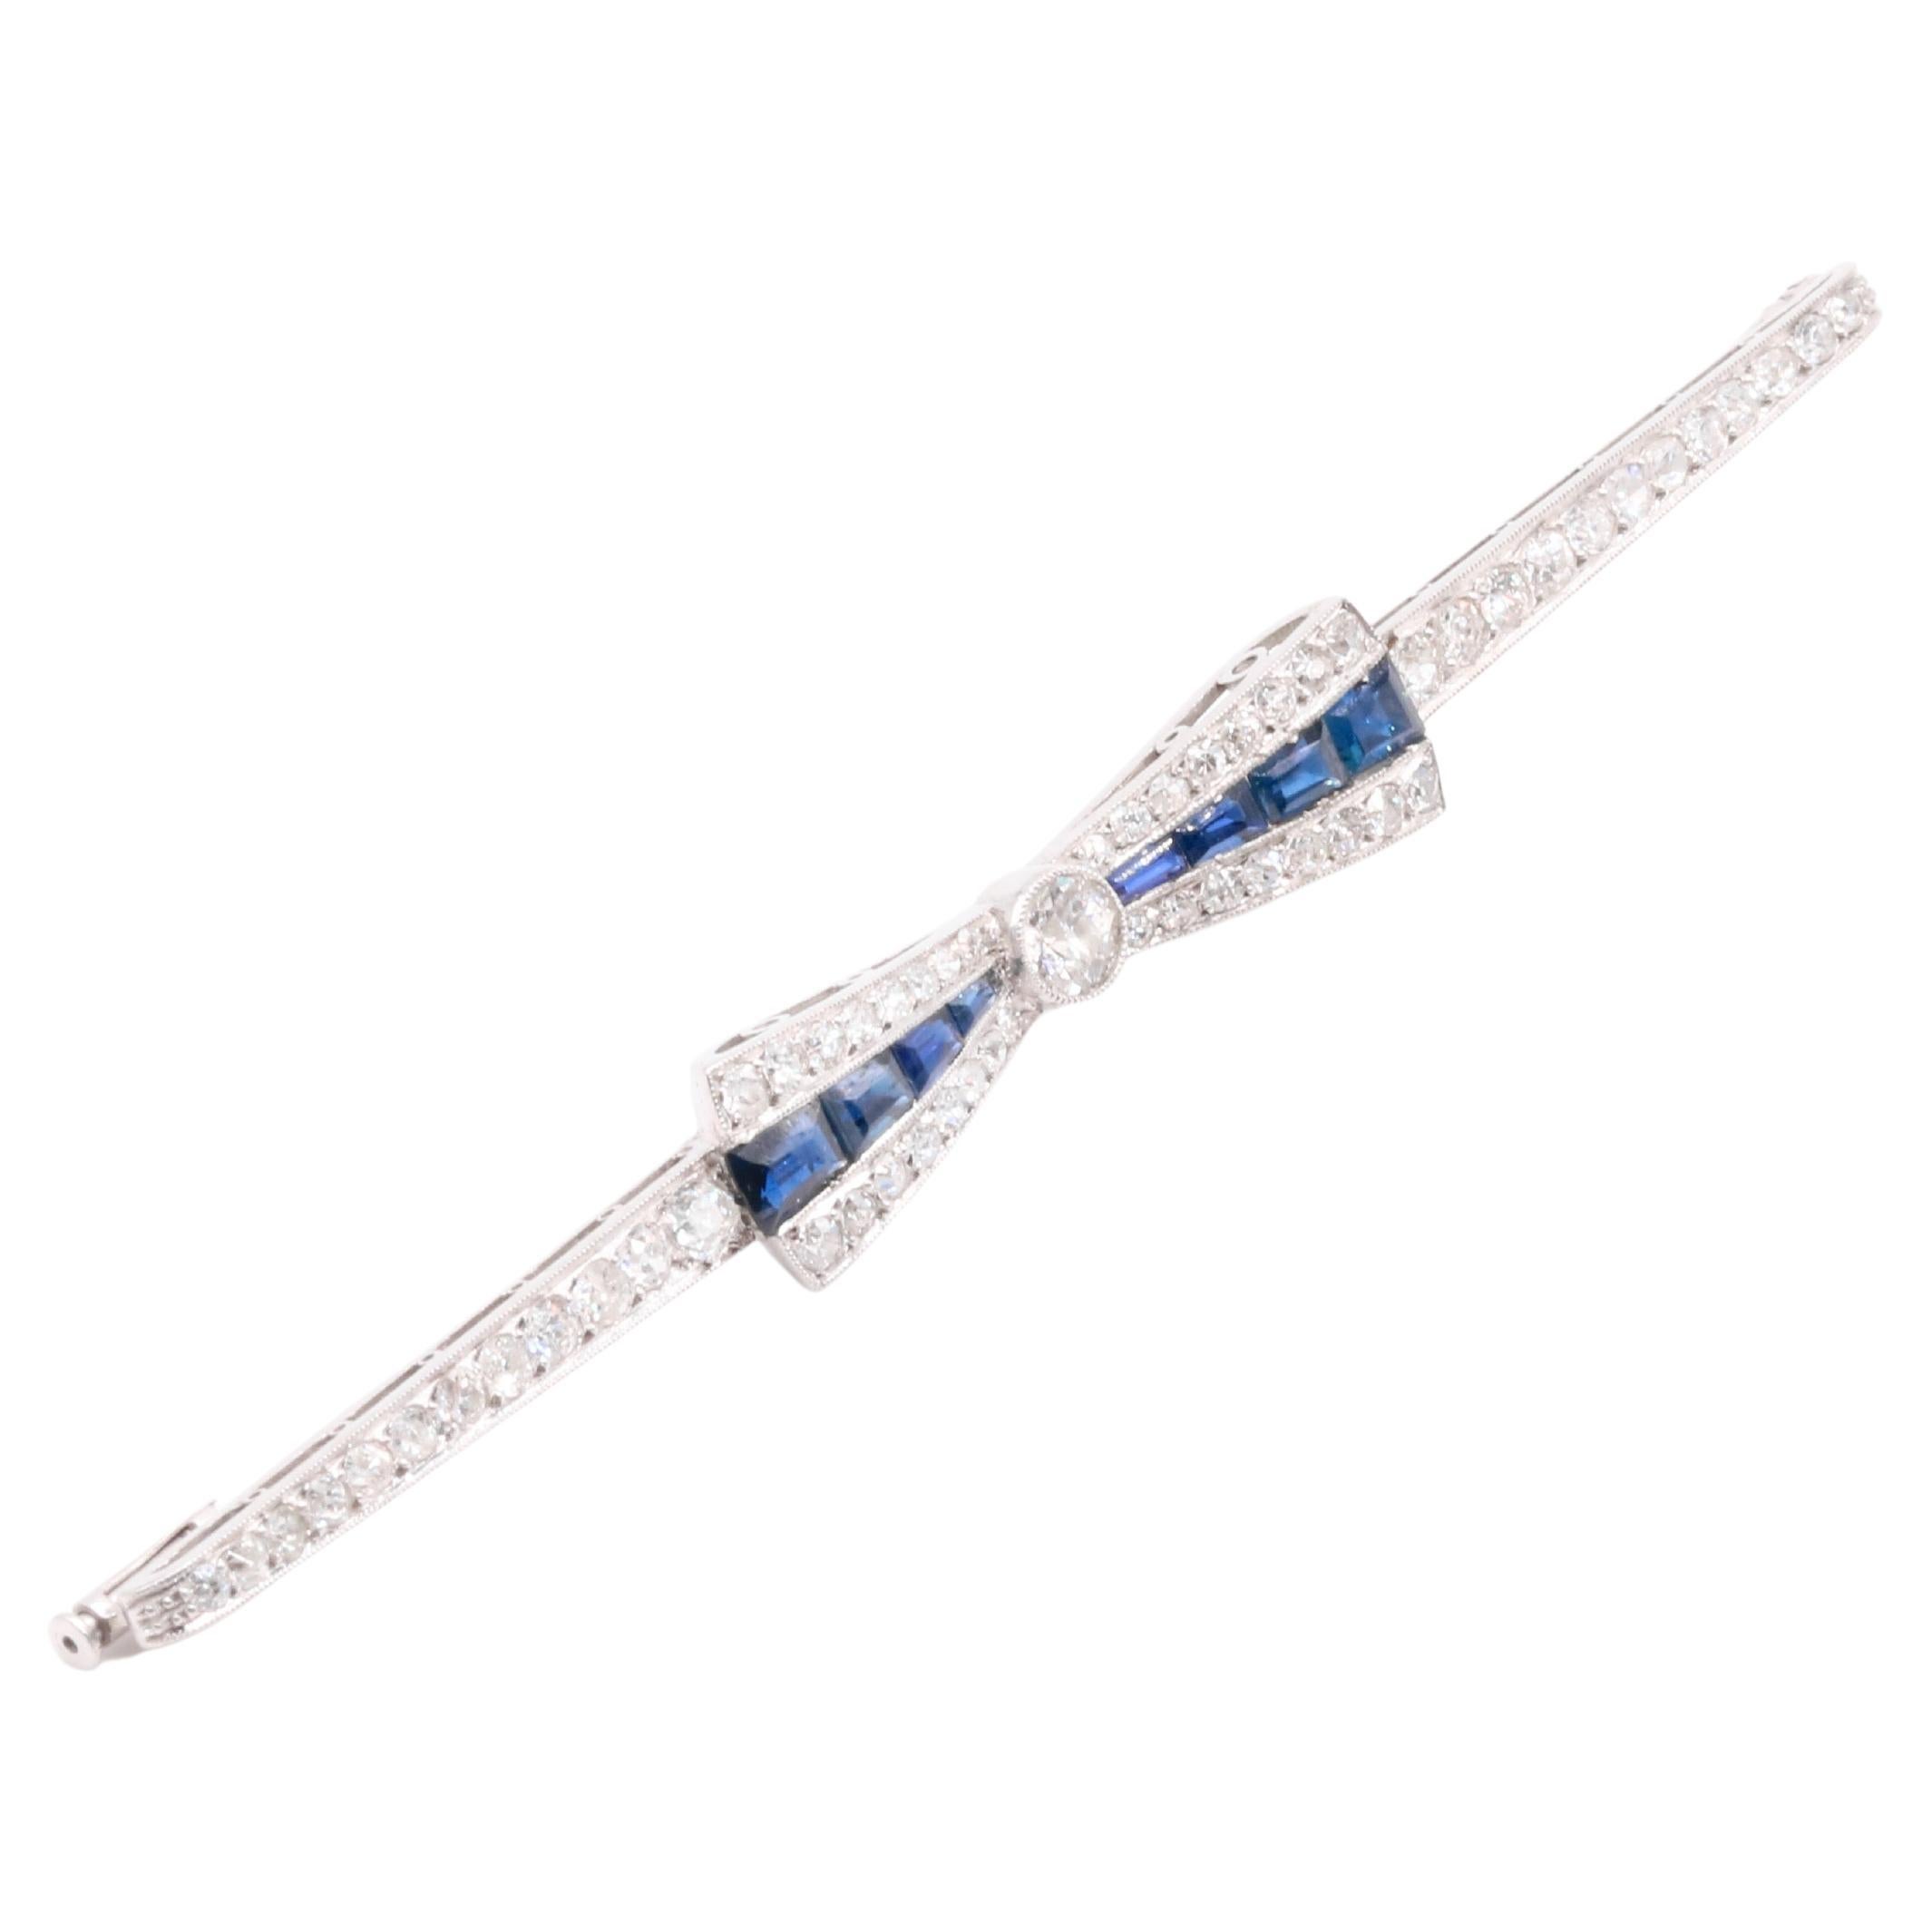 French Art Deco 1920s Platinum 2.88tgw Sapphire and Old Cut Diamond Bow Brooch For Sale